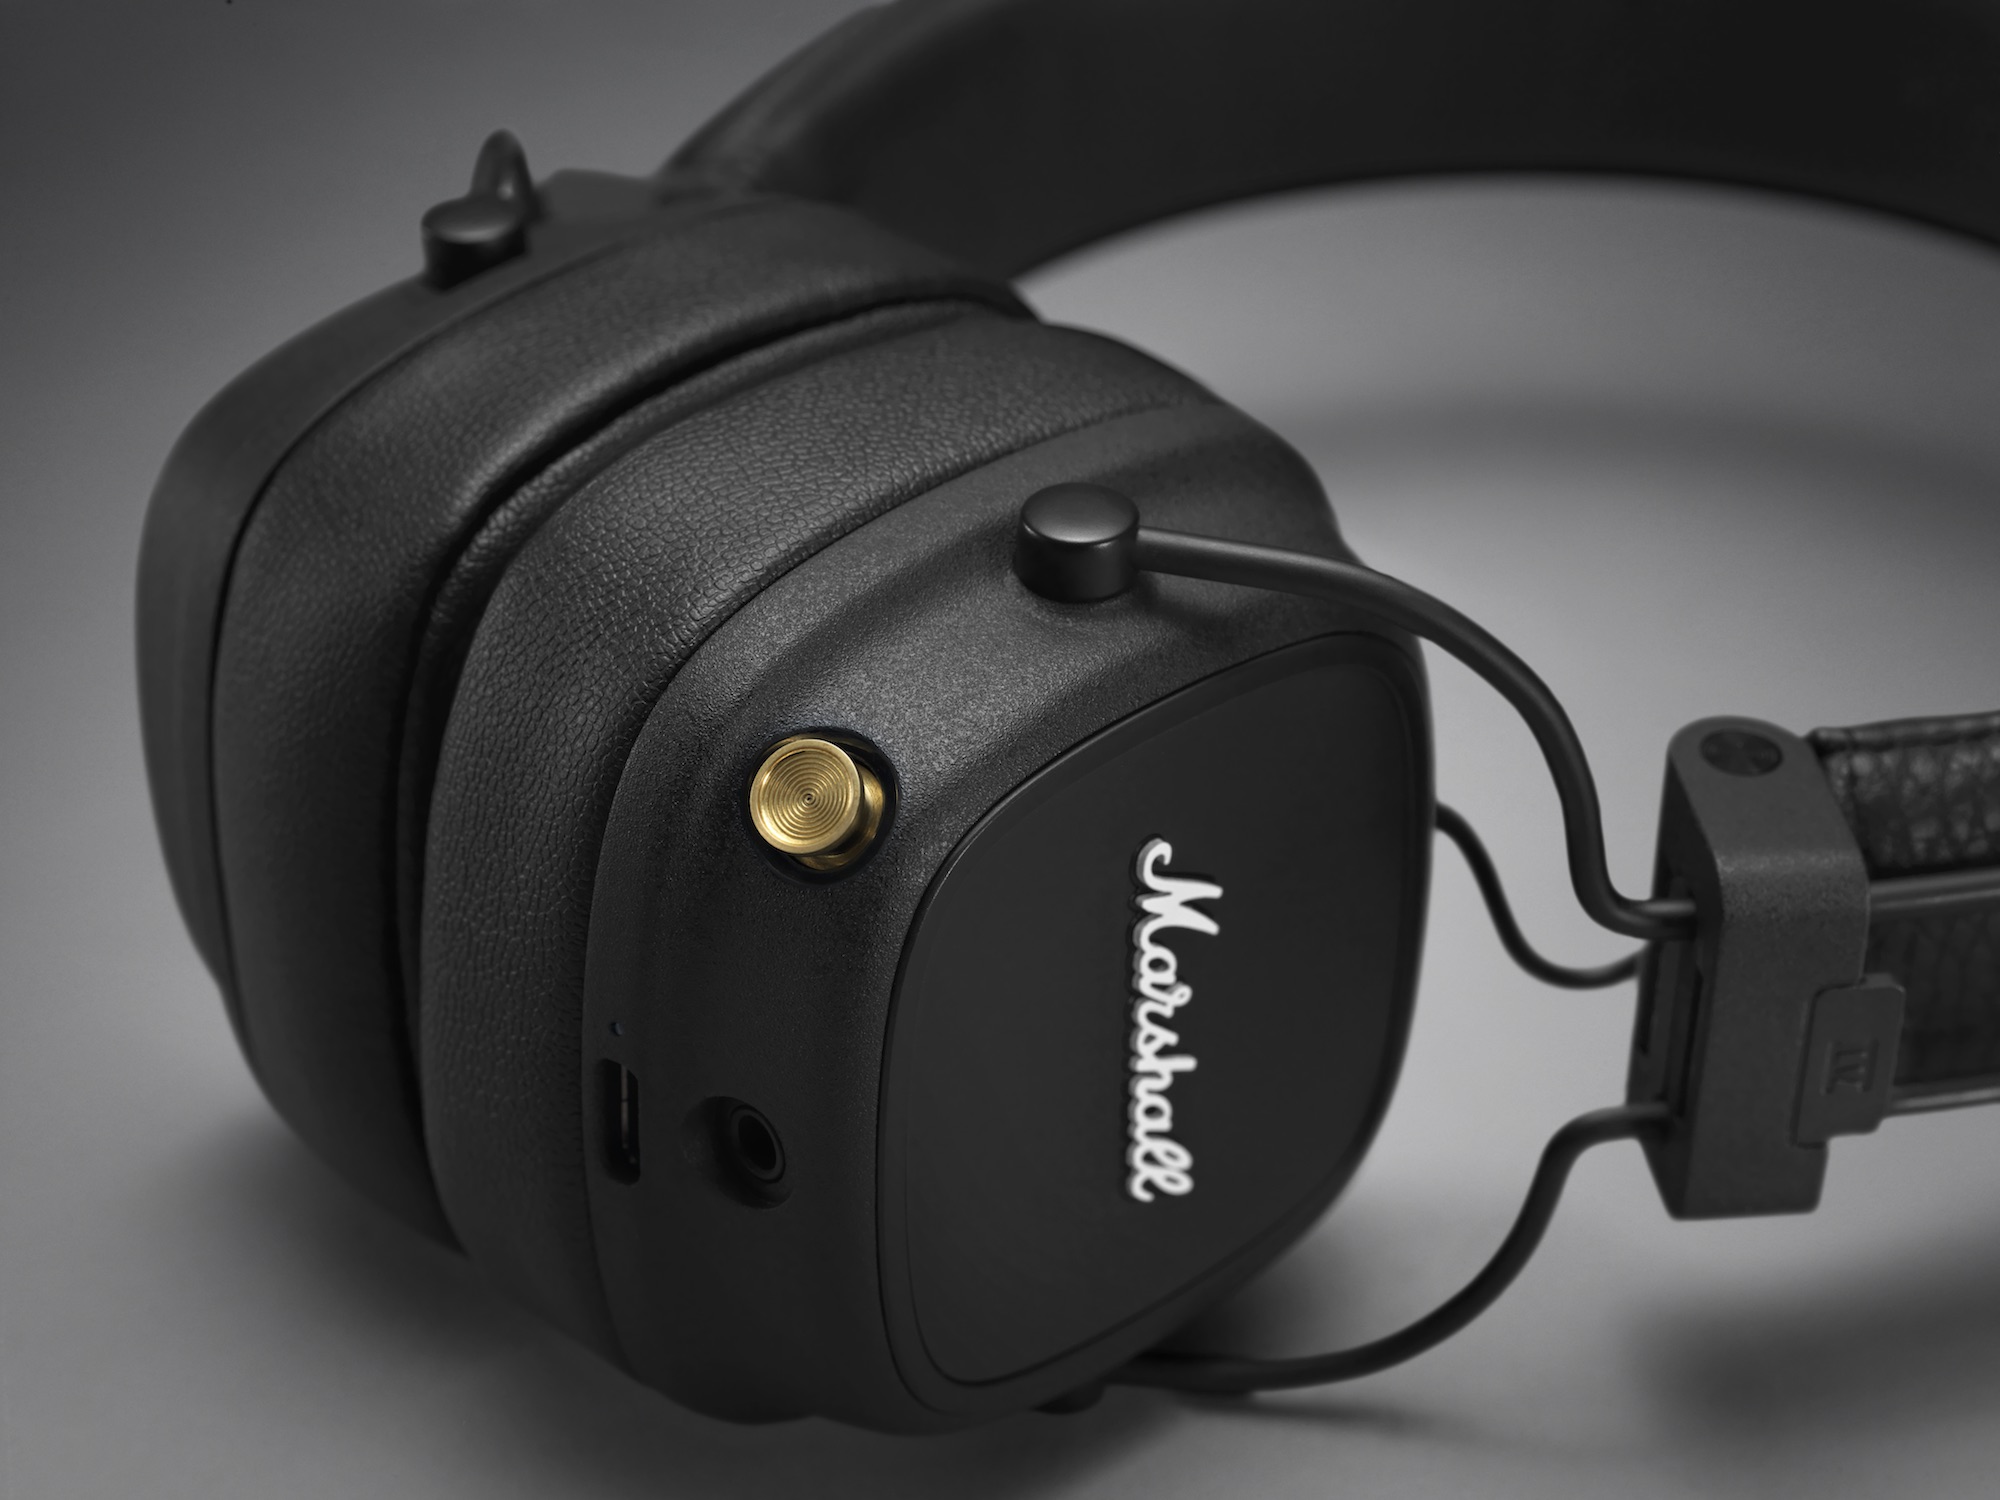 Marshall Major IV Headphones Review: wireless charge, more - 9to5Toys